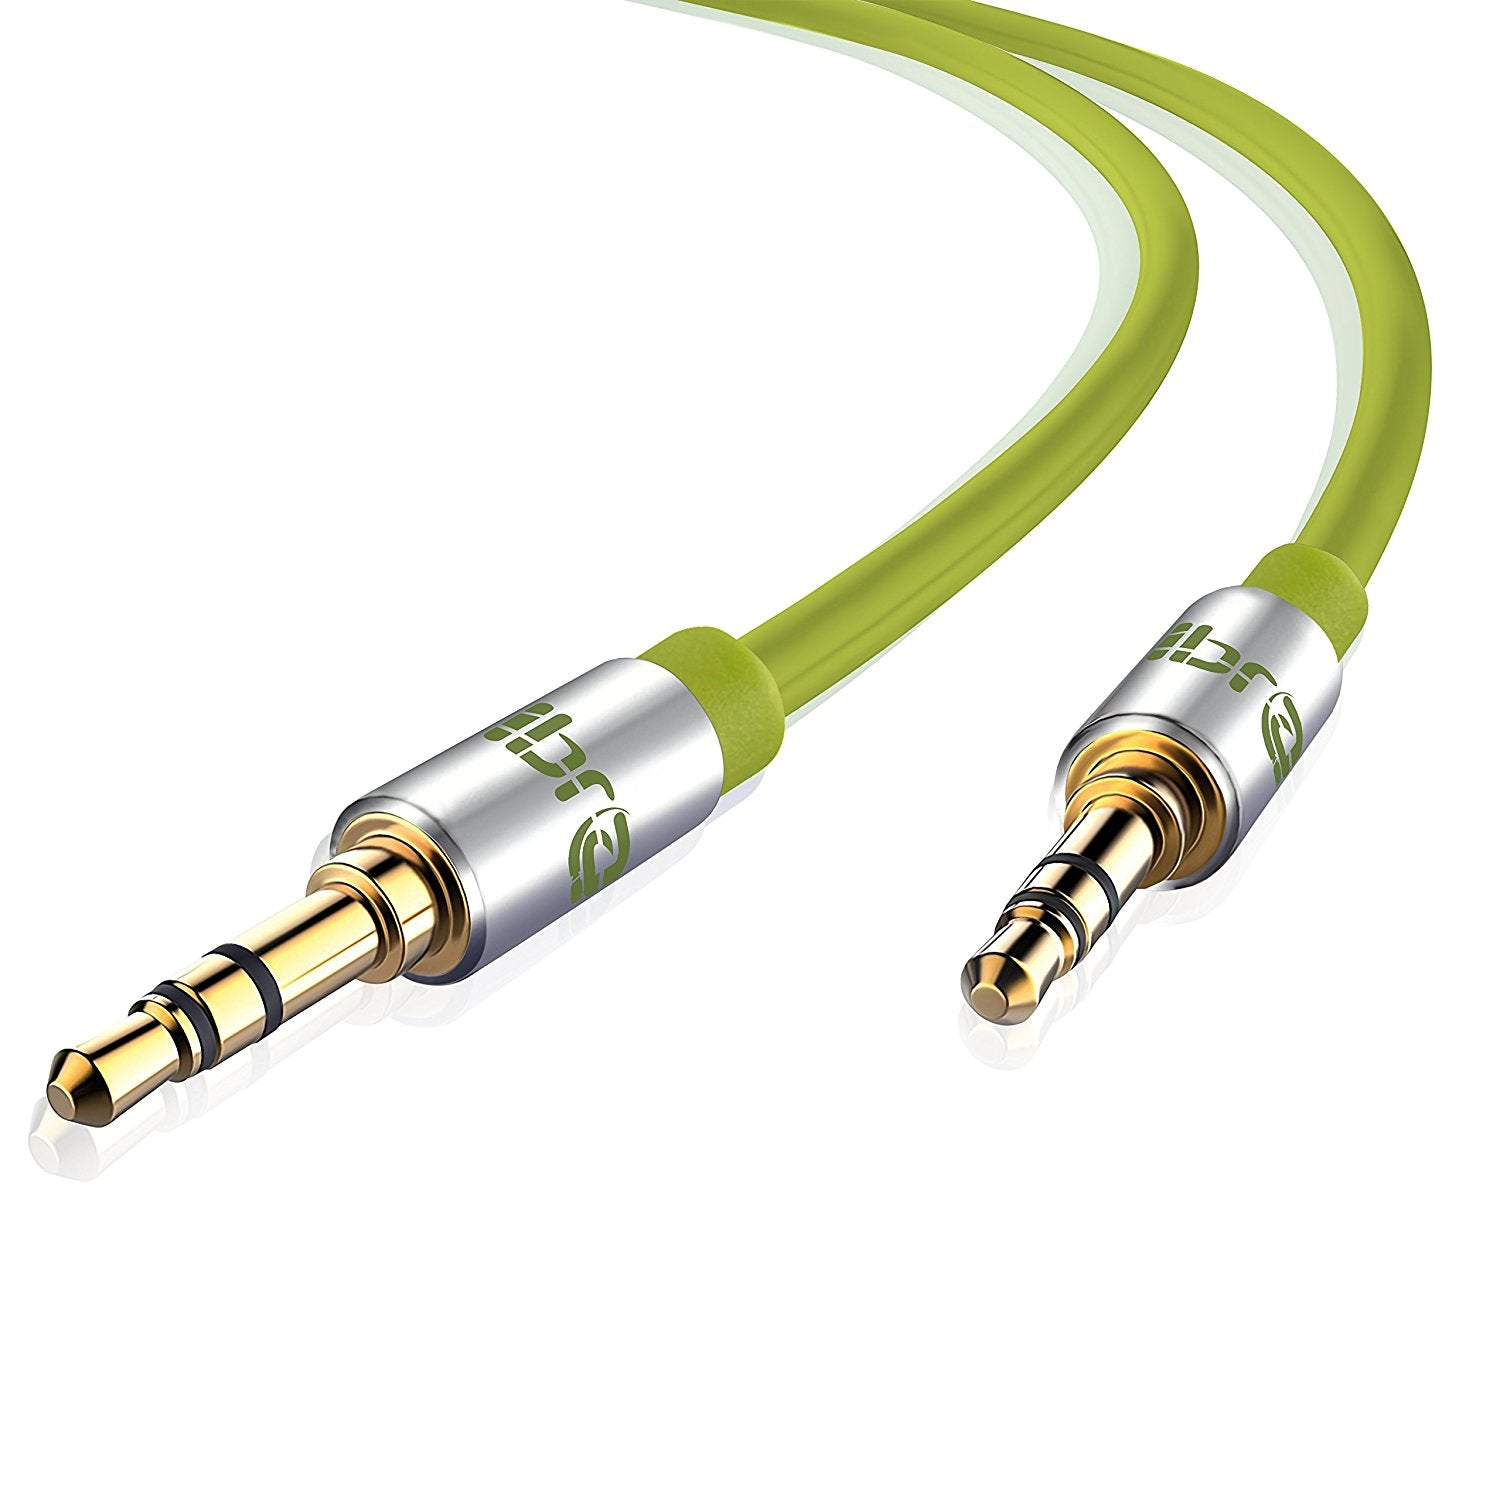 Aux Cable 1M 3.5mm Stereo Pro Auxiliary Audio Cable - for Beats Headphones Apple iPod iPhone iPad Samsung LG Smartphone MP3 Player Home / Car etc - IBRA Green